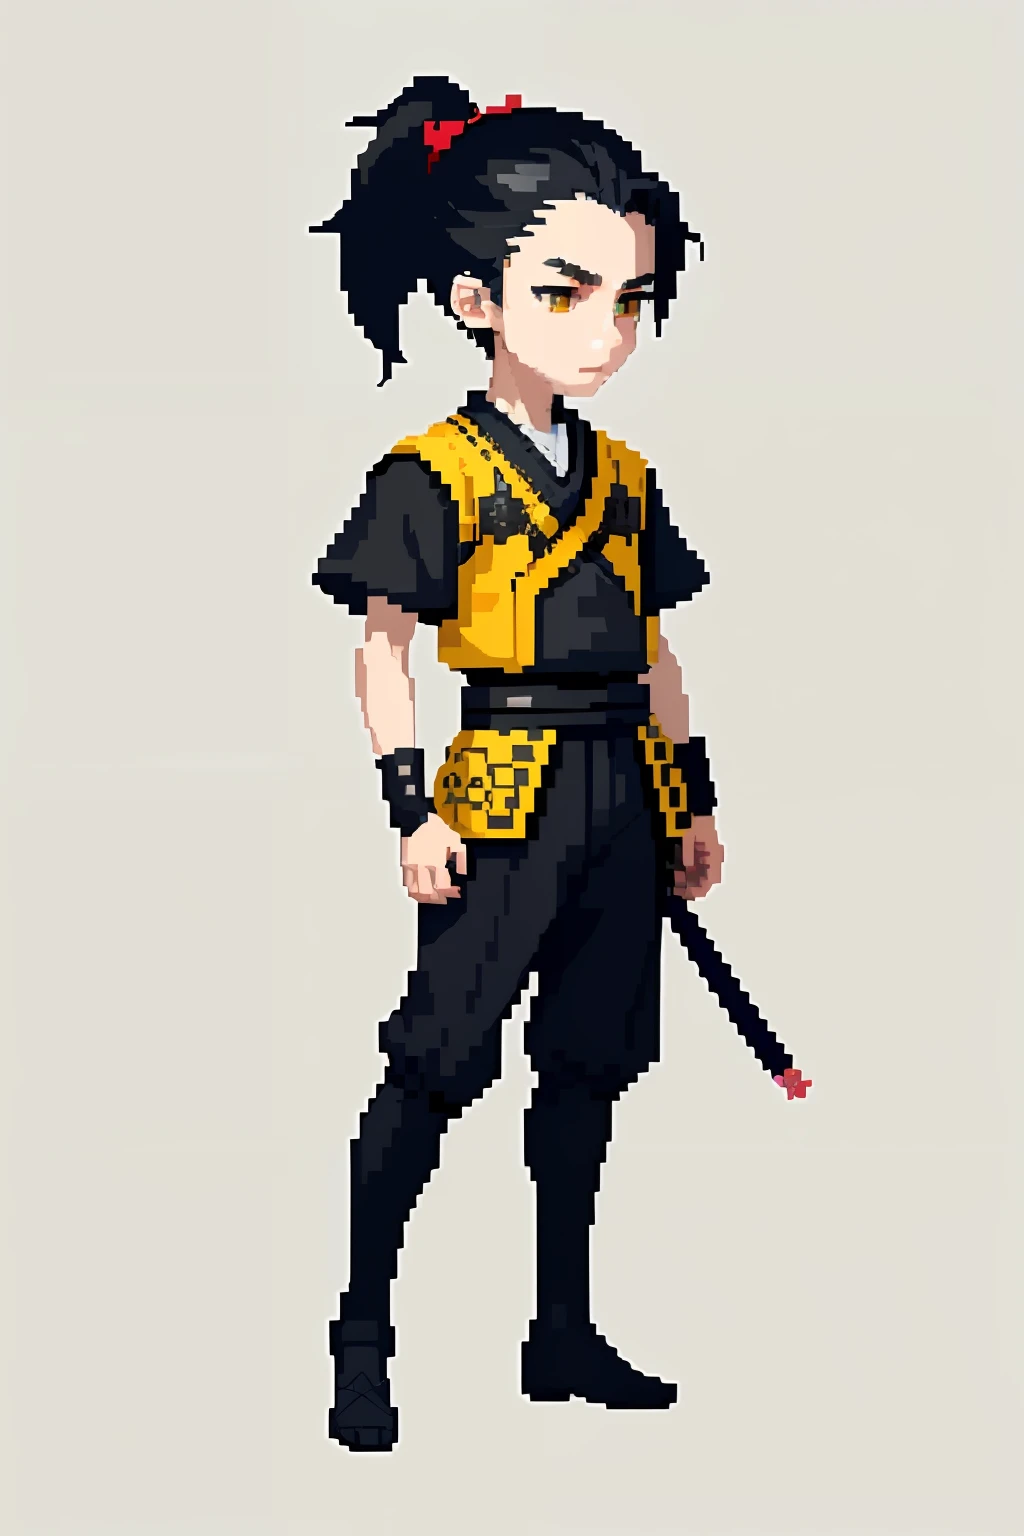 (masterpiece), top quality, best quality), pixel, pixel art,1boy,16 yrs. old, full body, Samurai outfit, pale skin young boy, yellow eyes, black hair, mid-size ponytail, calm face, male